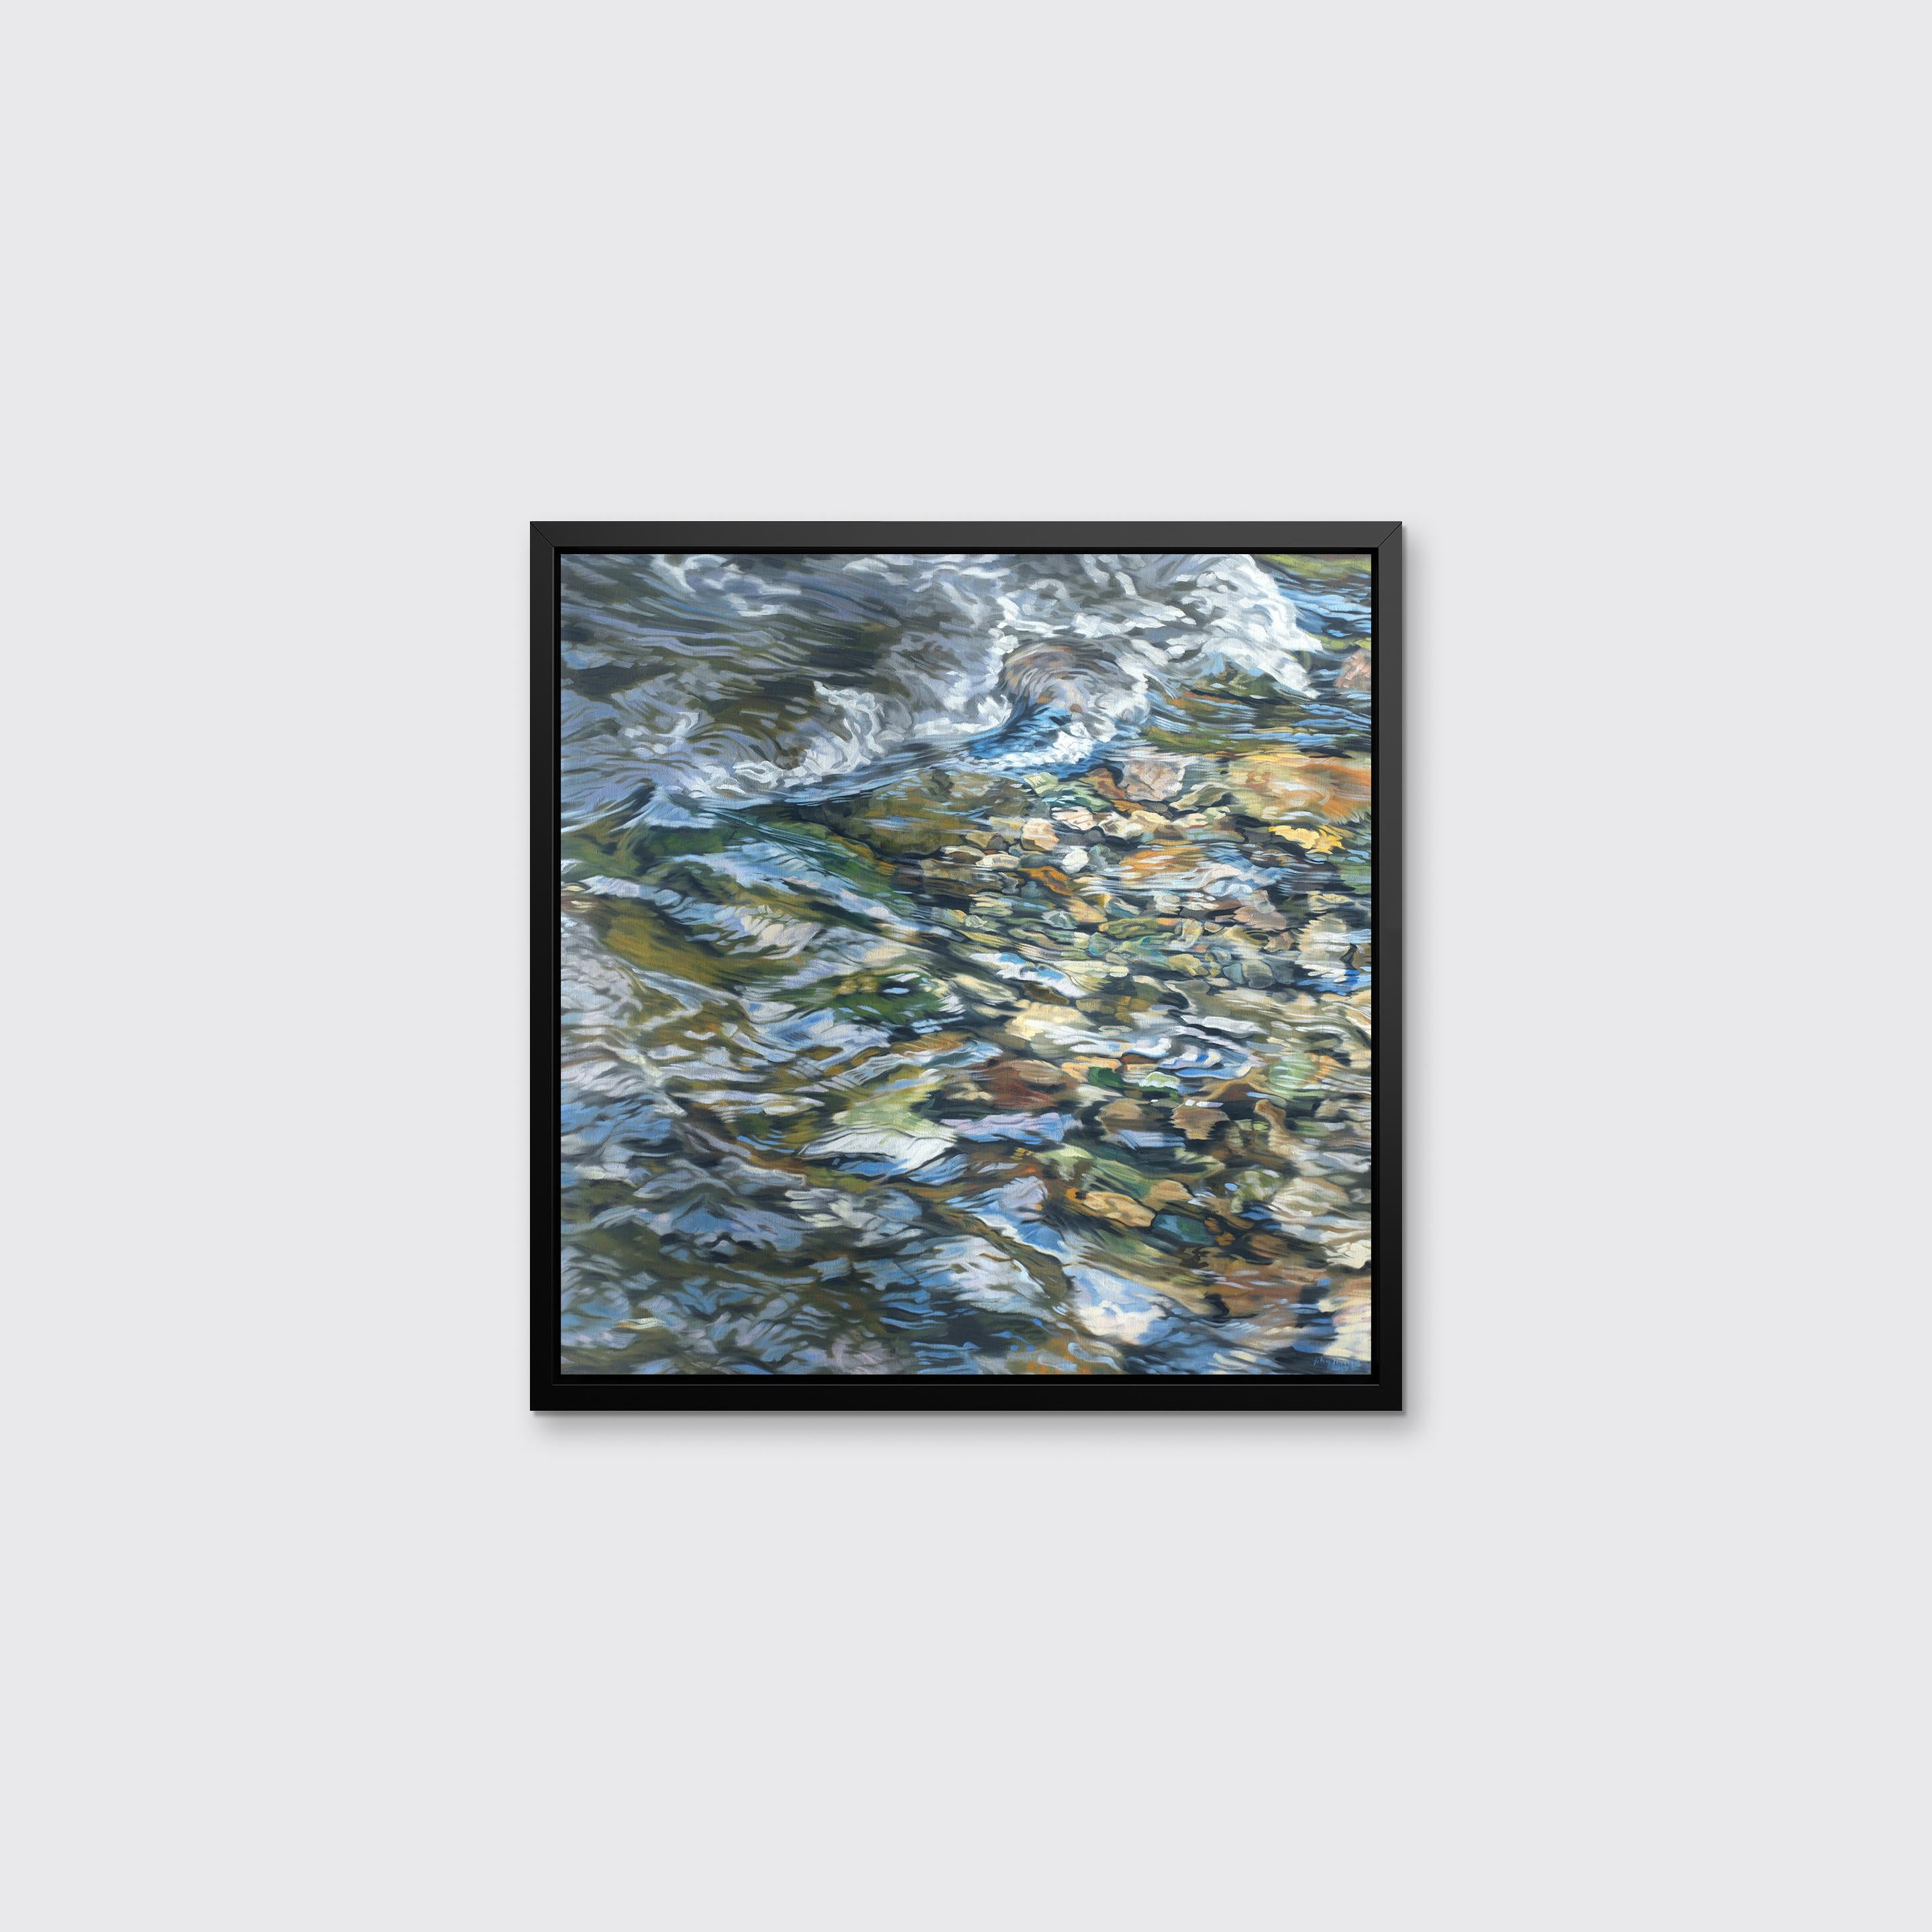 This realistic limited edition print captures a highly detailed, close up view of river water running over small, colorful rocks. Above the shapes, textures, and earthy colors of the rocks, the water reflects the light above it. Filled with abstract